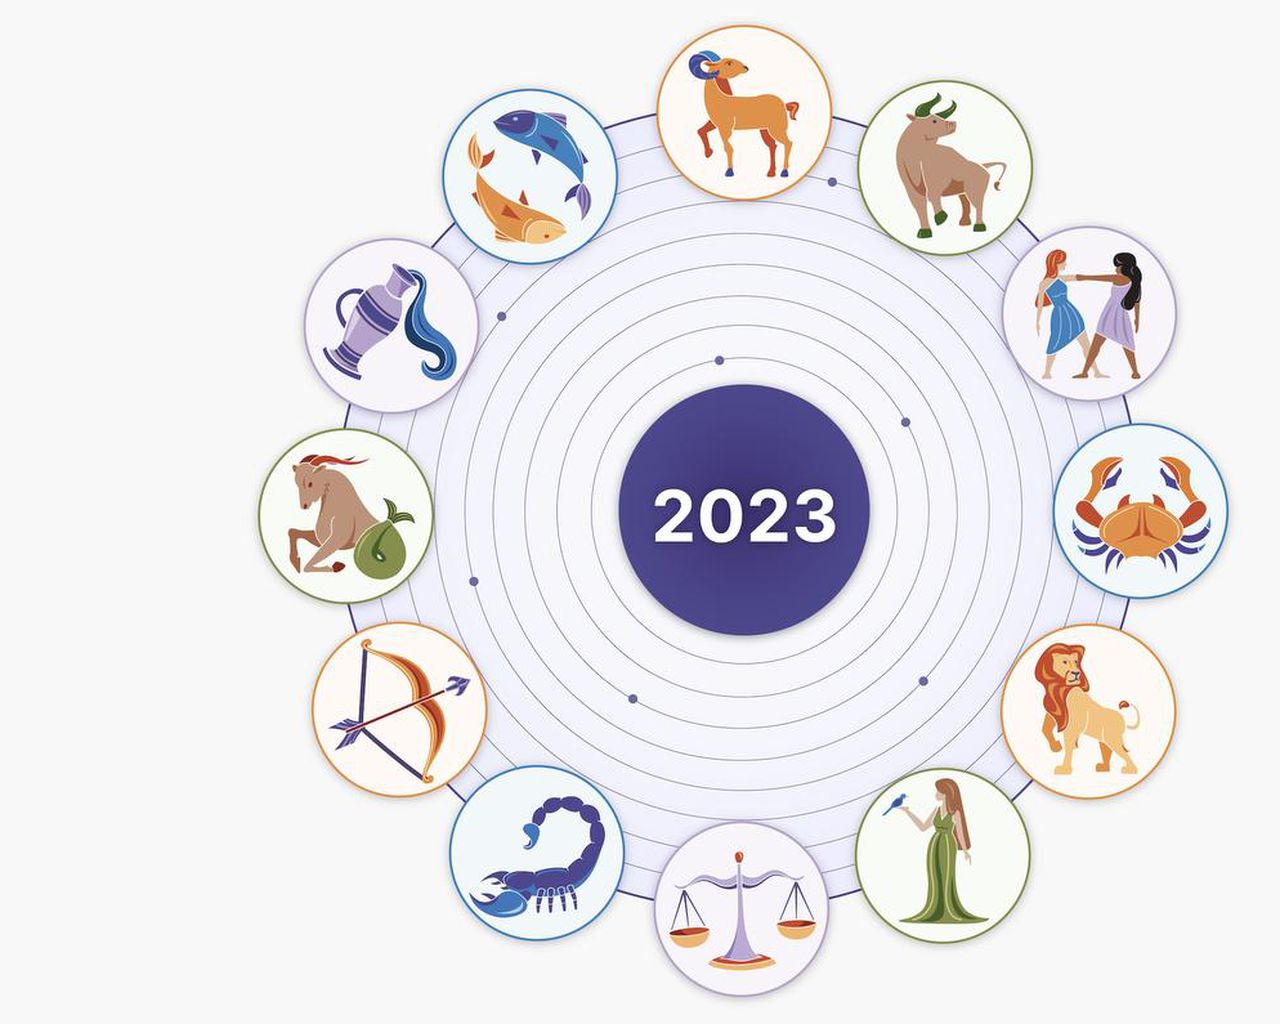 What's your 2023 horoscope?